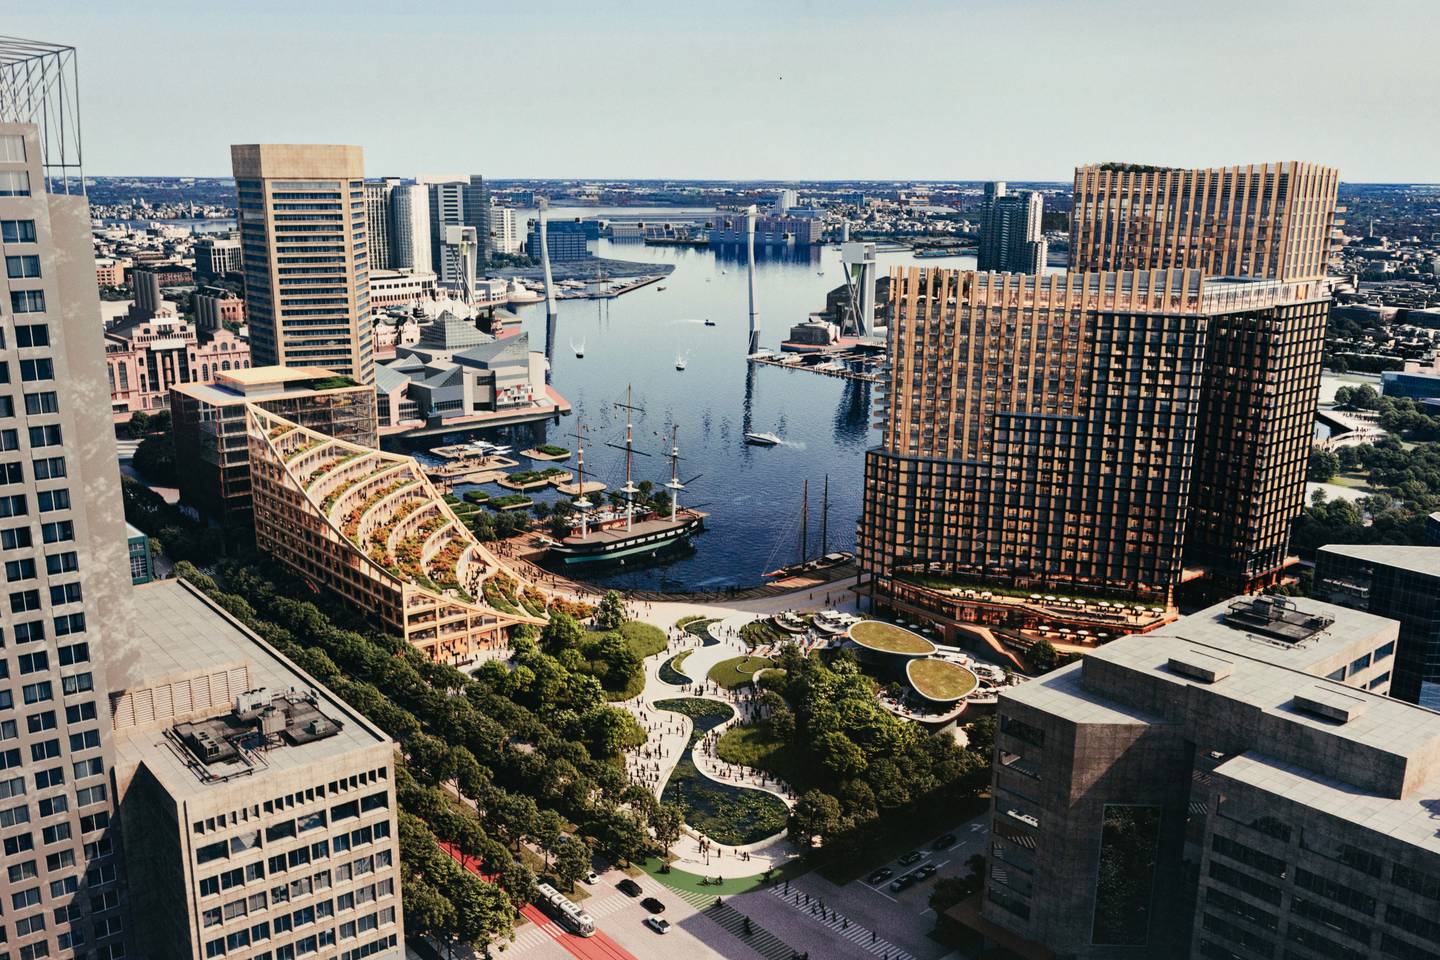 An illustration of design plans for the upcoming Harborplace development is revealed at a press conference held by MCB Real Estate, at the Light Street pavilion on Monday, Oct. 30, 2023.